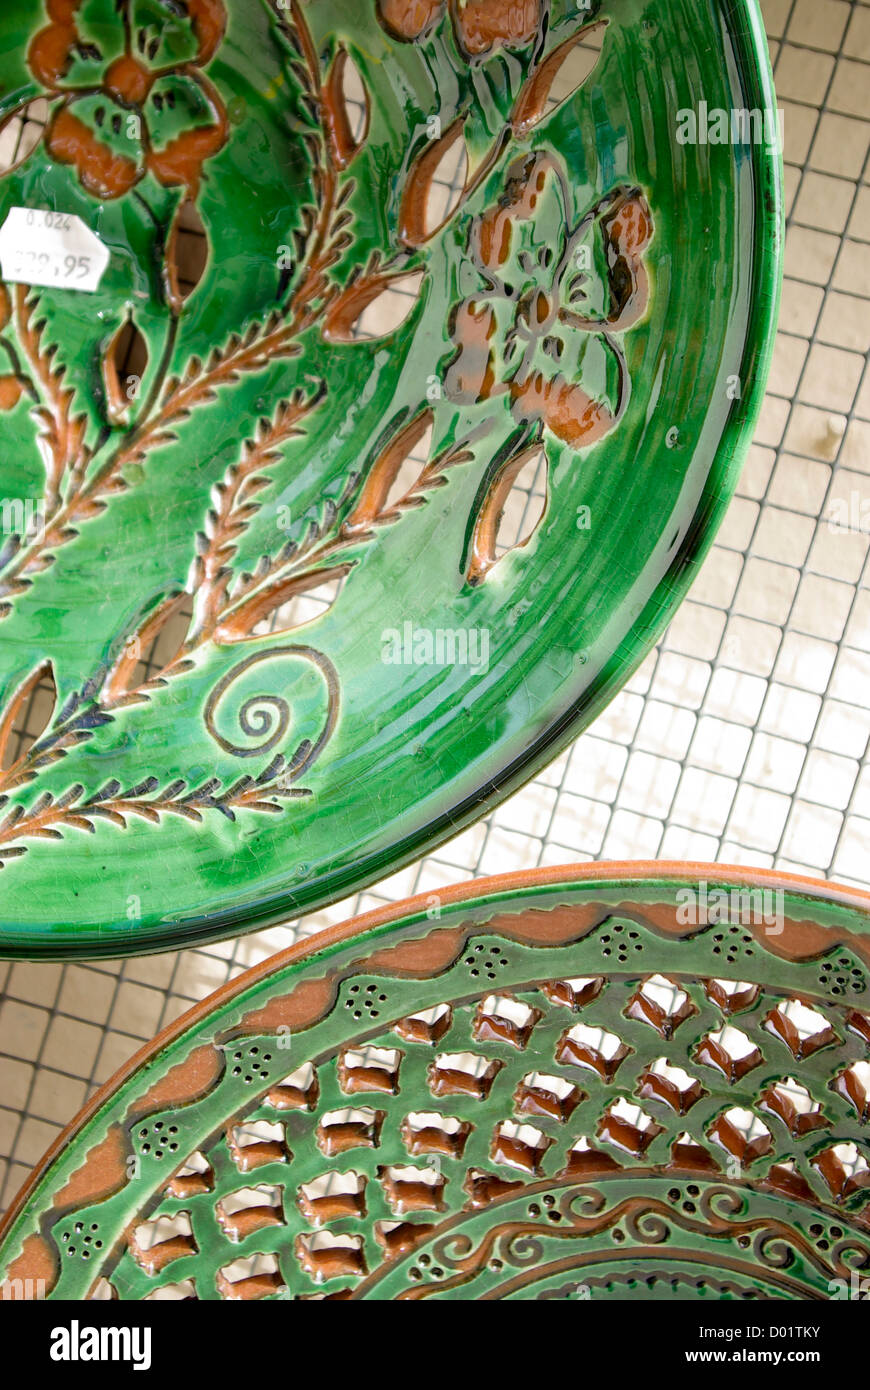 Close-up of plates for sale in a tourist shop in Ronda, Andalusia, Spain with price tag. Stock Photo